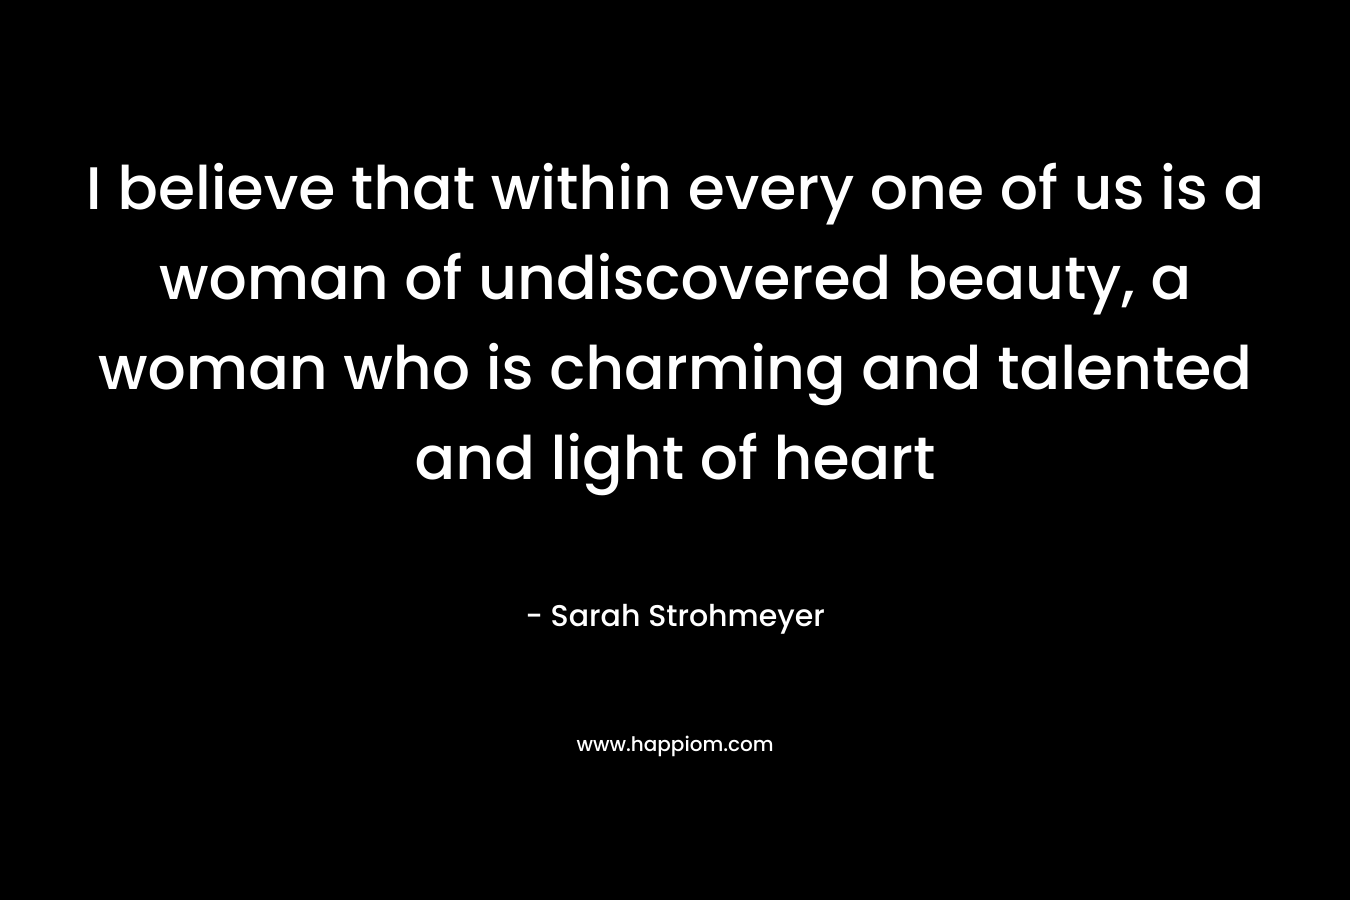 I believe that within every one of us is a woman of undiscovered beauty, a woman who is charming and talented and light of heart – Sarah Strohmeyer